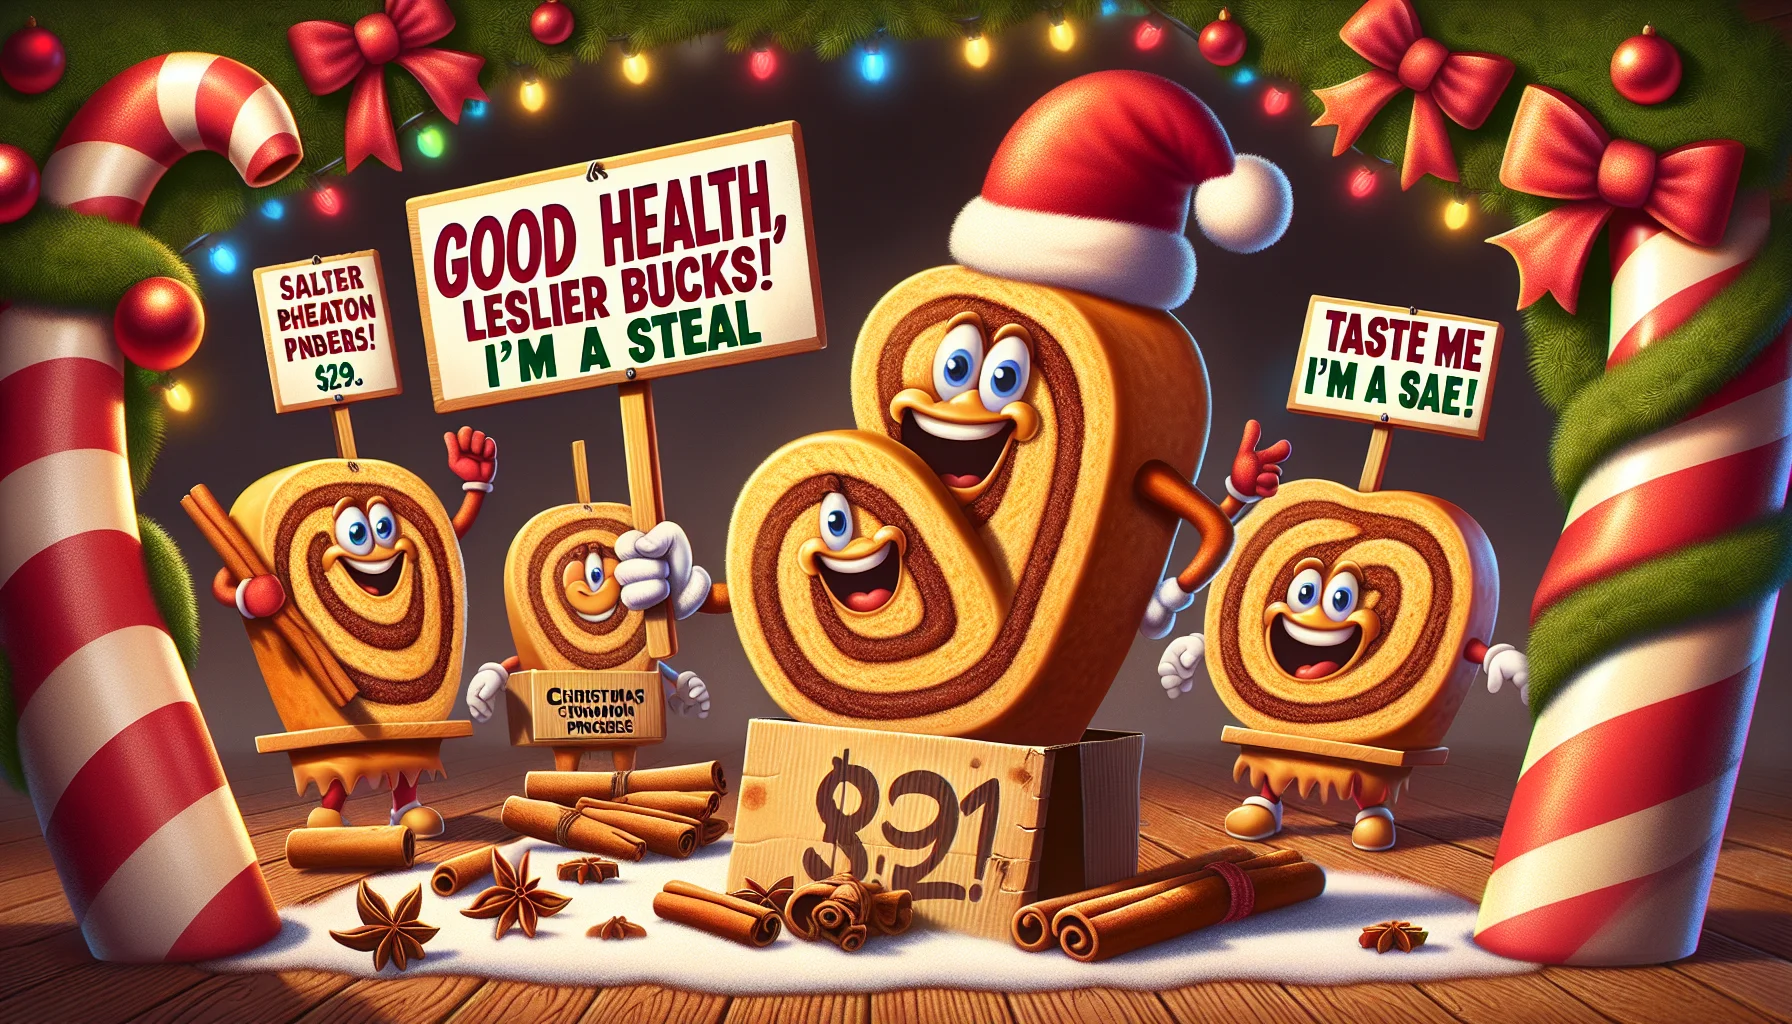 Present a humorous and realistic scenario with the spotlight on Christmas Cinnamon Pinwheels. Imagine these delicious treats personified, gleefully promoting a healthy lifestyle and the possibility of spending less money. They're holding signs that read 'Good Health, Lesser Bucks!' and 'Taste me, I'm a steal!'. They're not only tempting the audience with their tastiness, but also advocating for economical healthy eating choices. The background should be festive with Christmas decor, and prominently display a price tag that suggests affordability. The color palette is warm and inviting with festive hues.